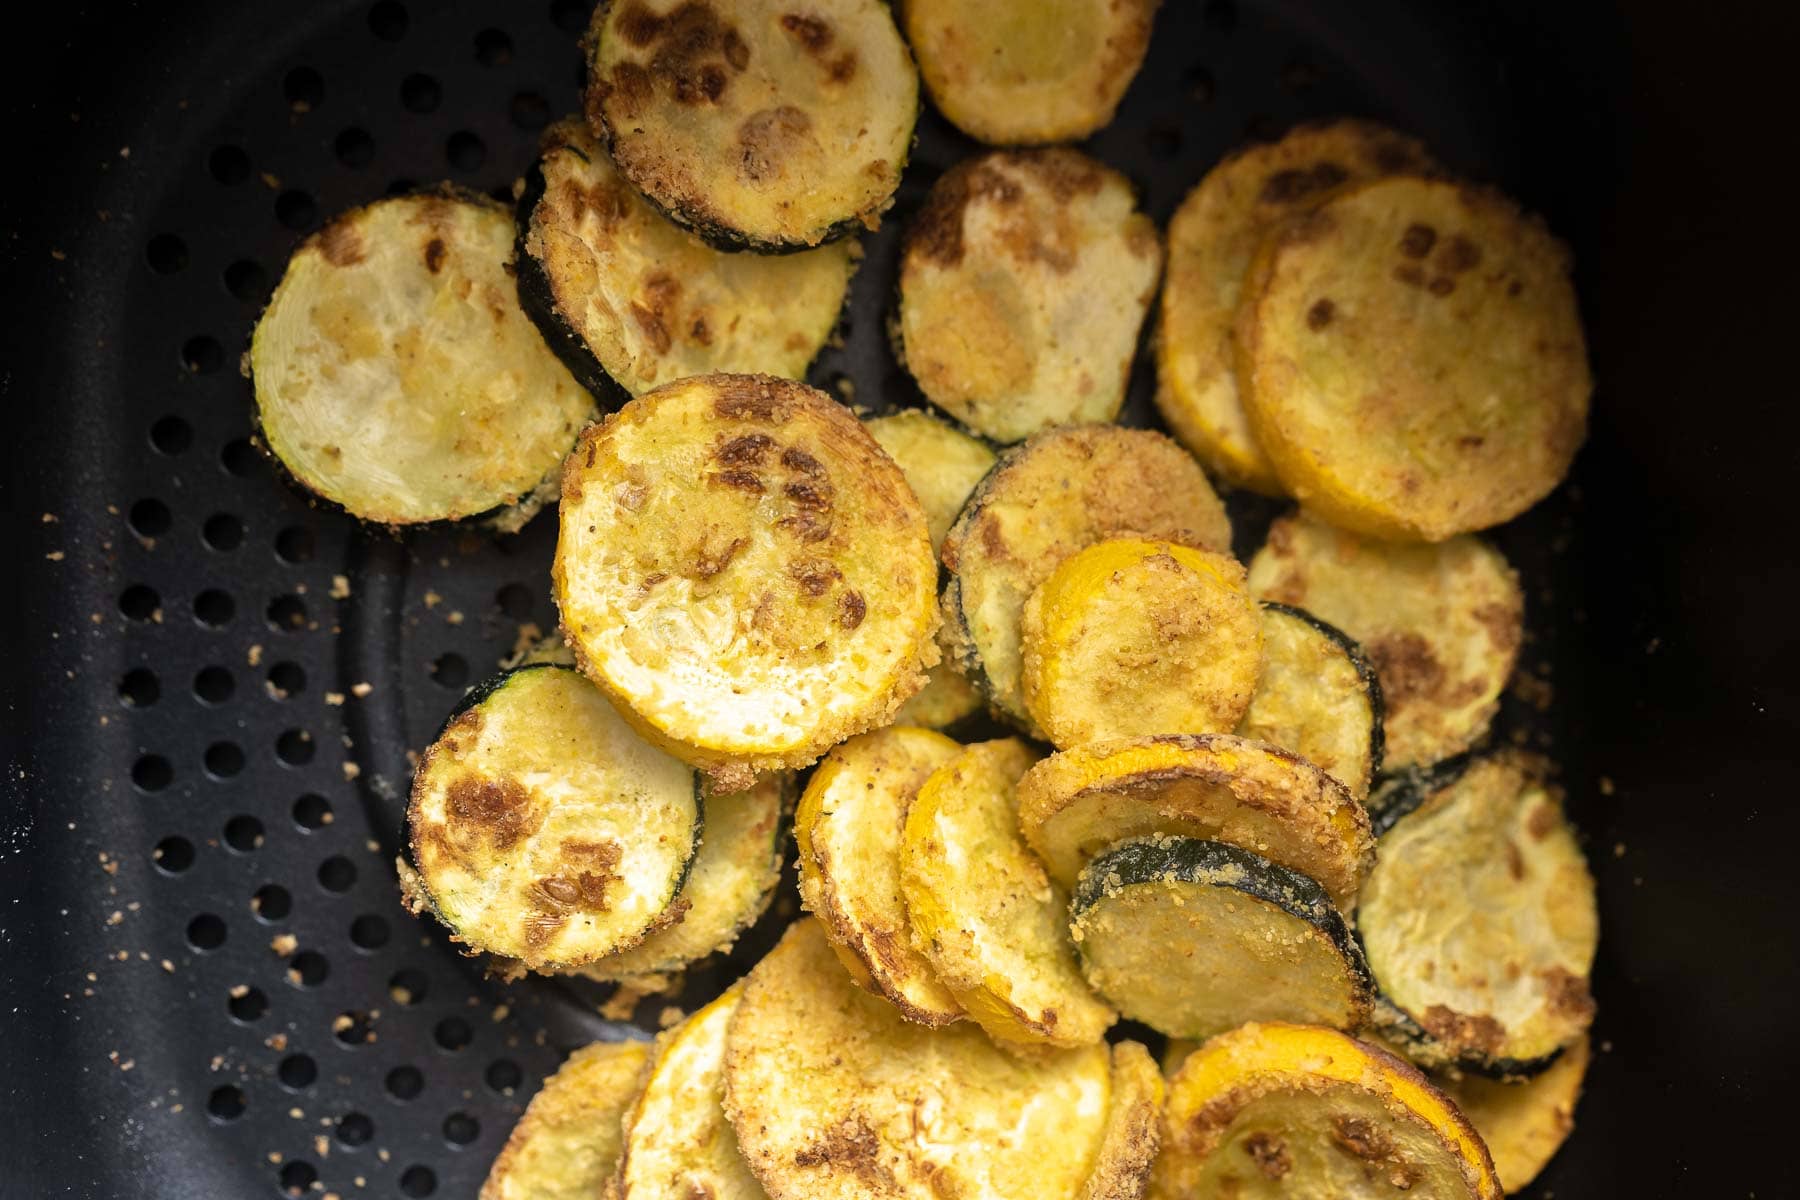 An air fryer basket filled with cooked, sliced squash.